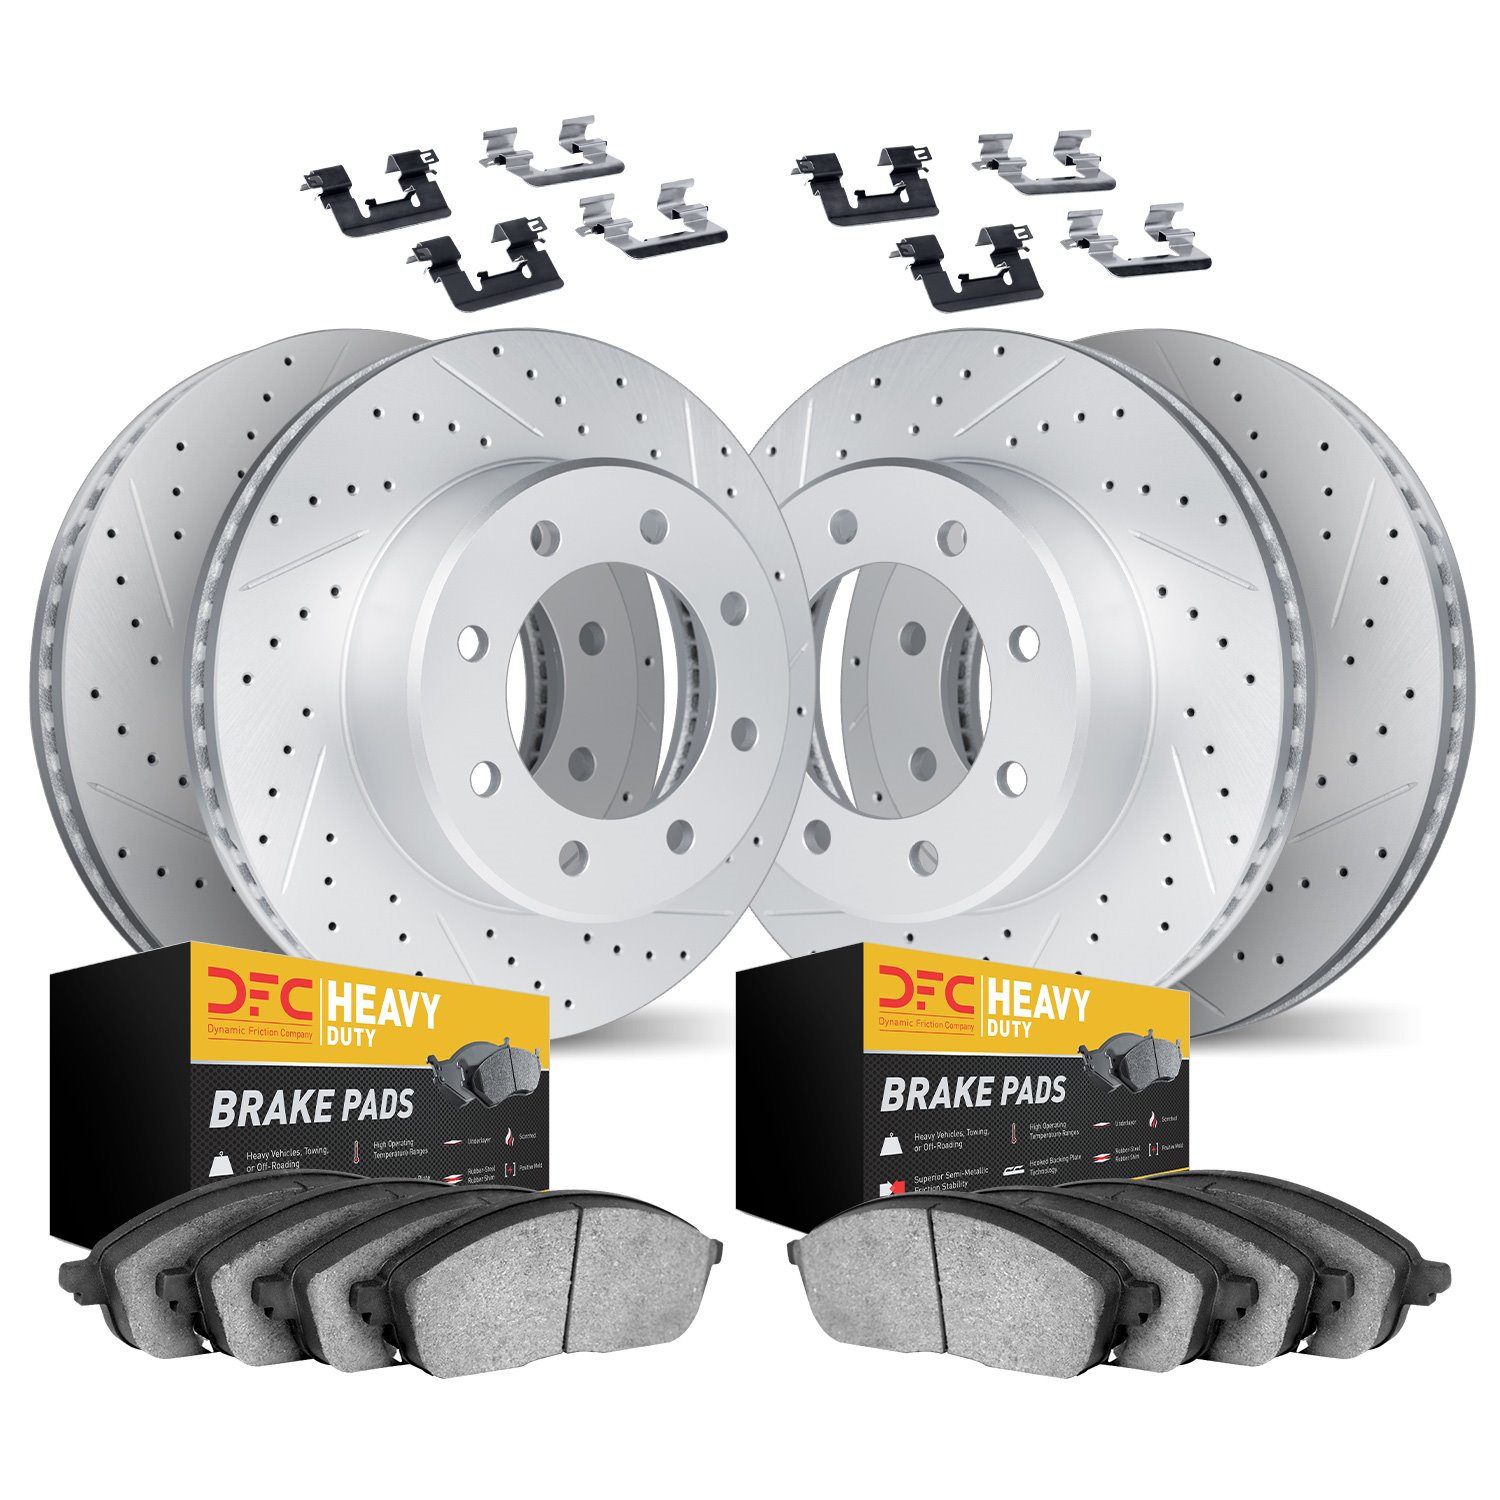 2214-99053 Geoperformance Drilled/Slotted Rotors w/Heavy-Duty Pads Kit & Hardware, 1999-2004 Ford/Lincoln/Mercury/Mazda, Positio